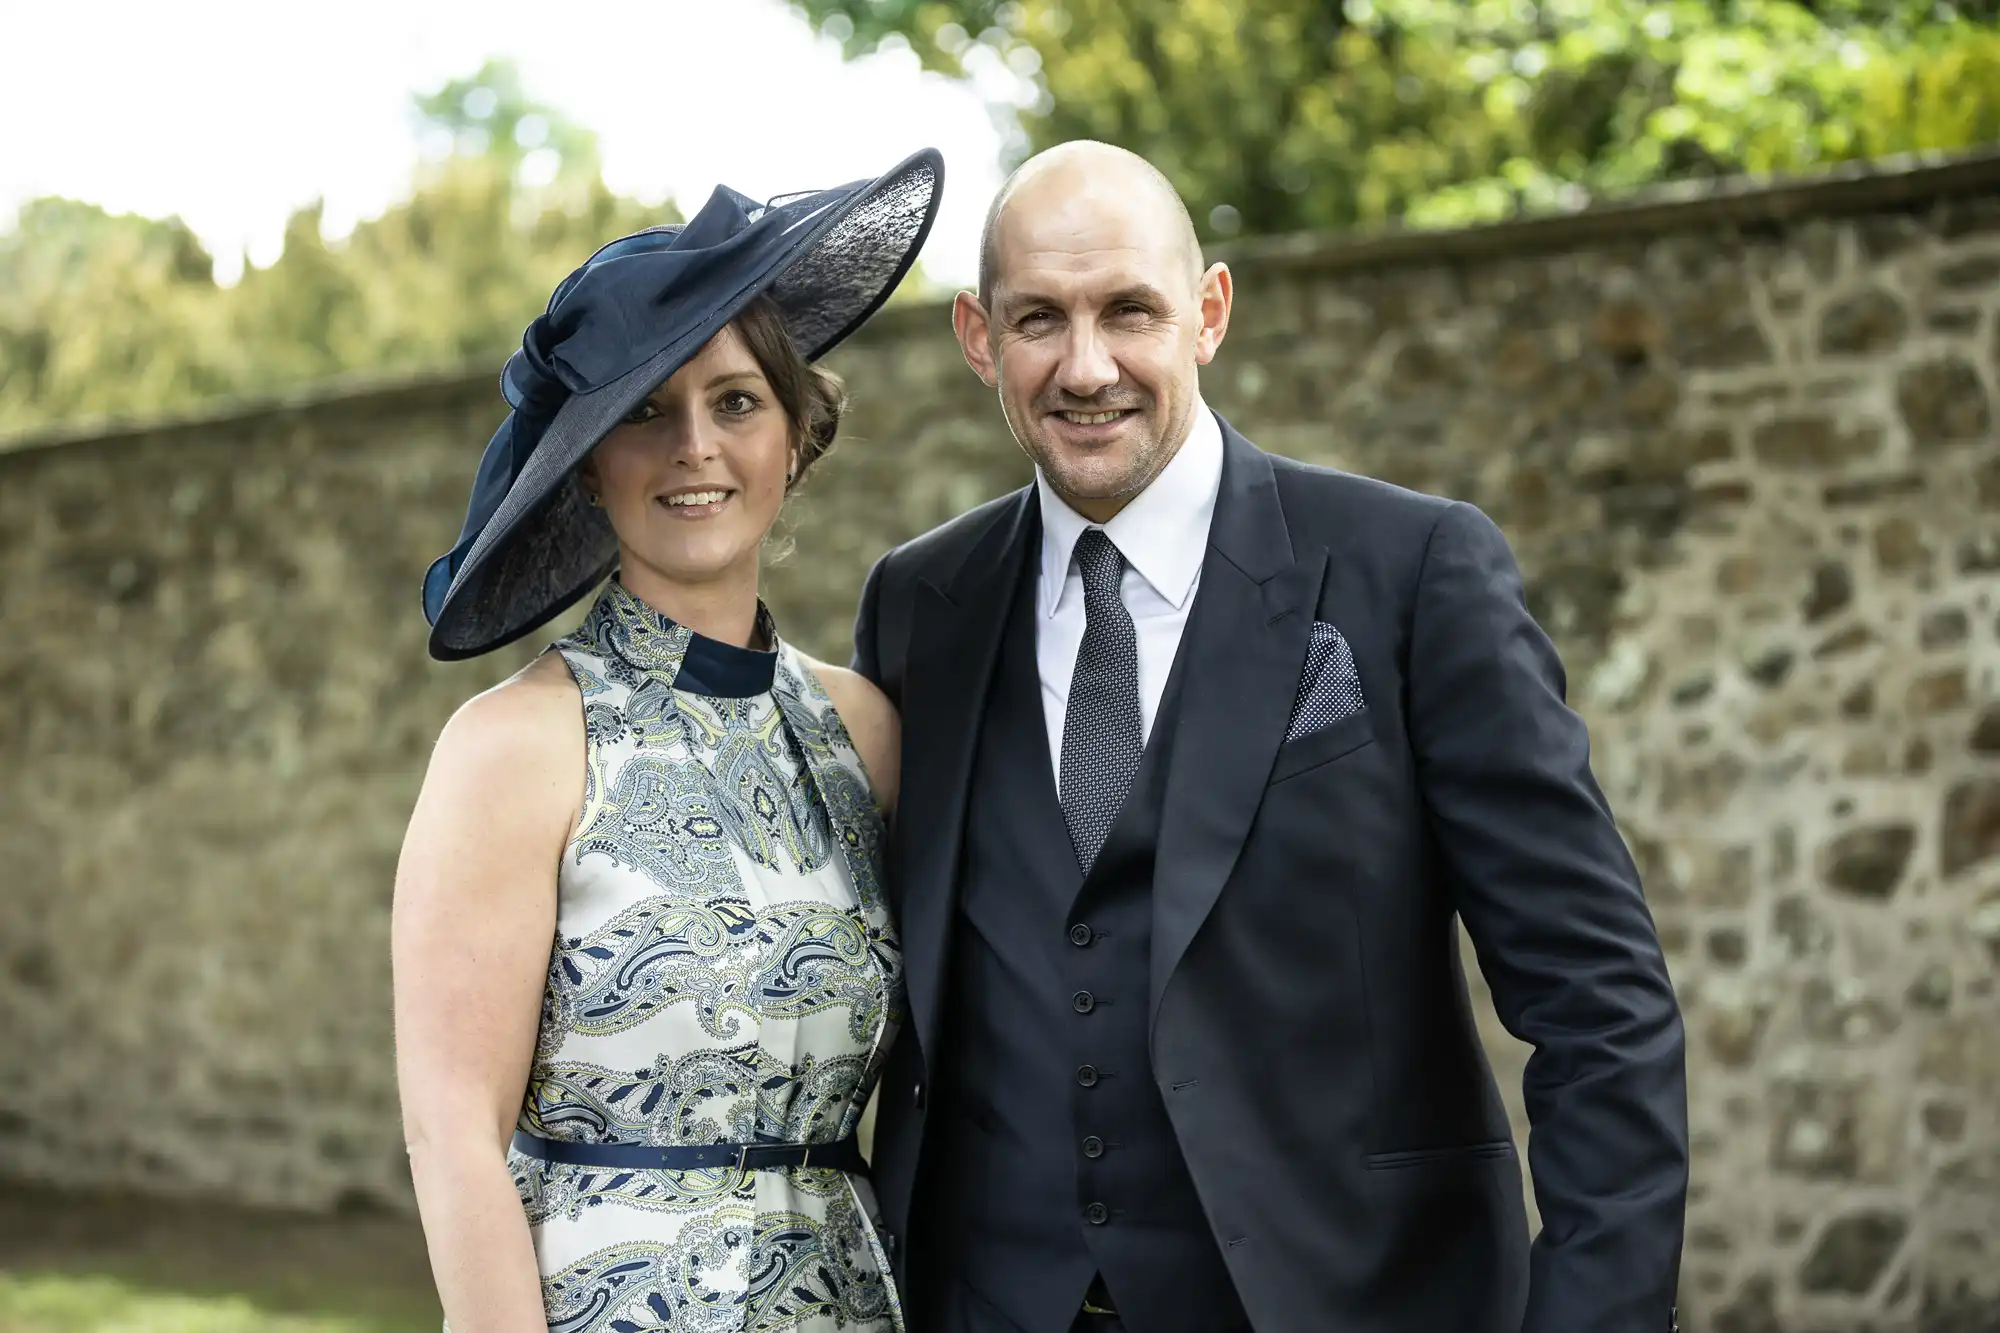 A well-dressed couple posing outdoors at a formal event, the woman in a patterned dress and wide-brimmed hat, and the bald man in a dark suit and tie.